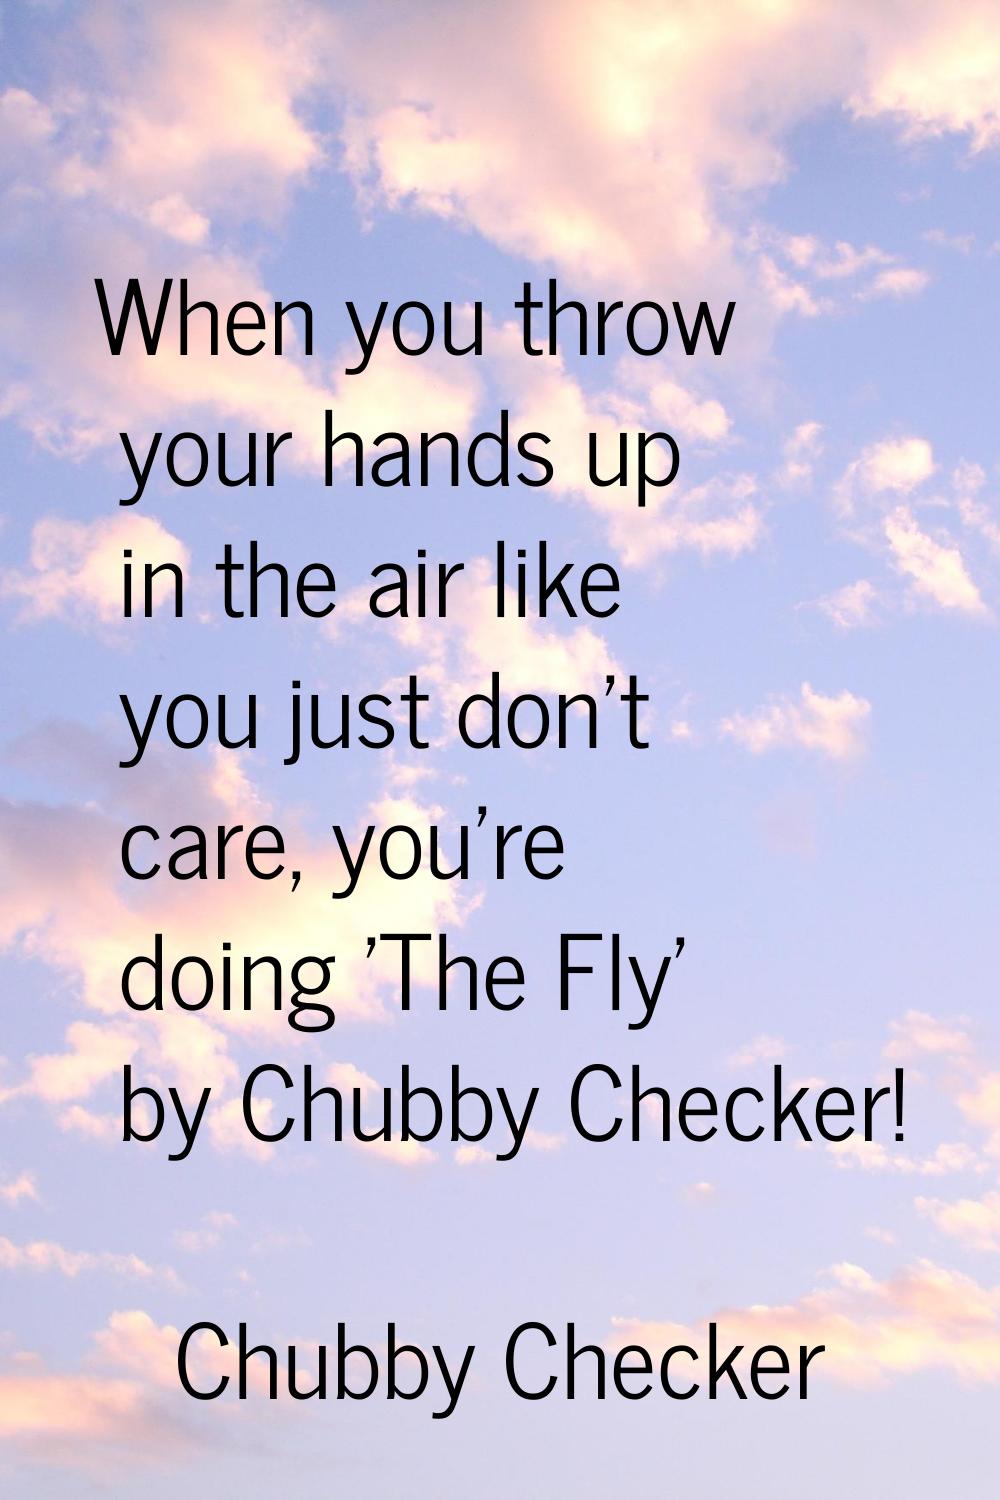 When you throw your hands up in the air like you just don't care, you're doing 'The Fly' by Chubby 